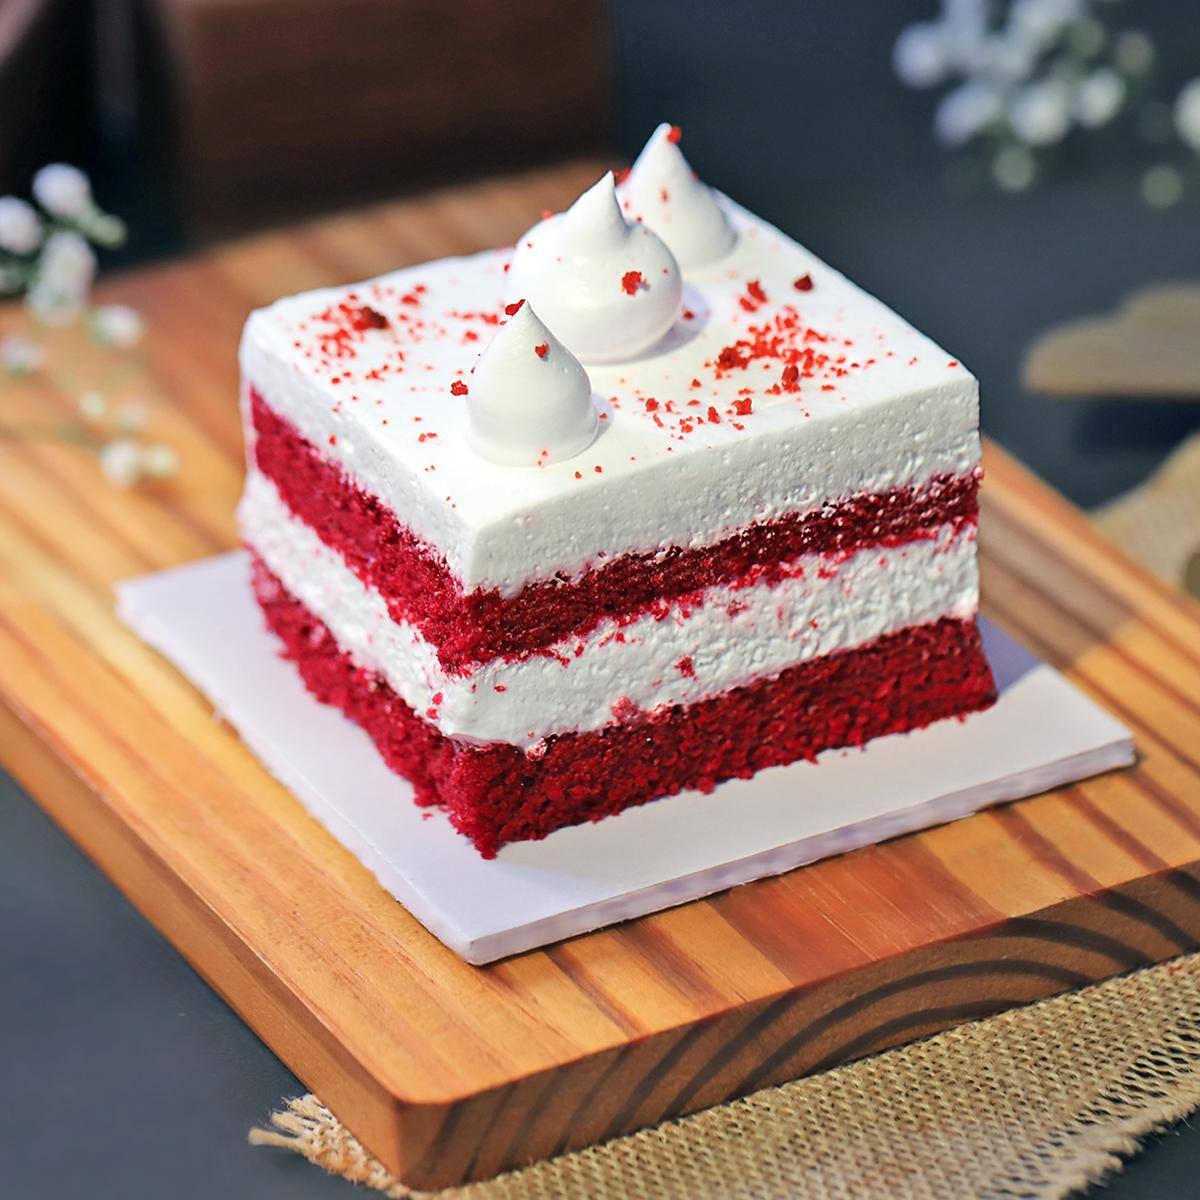 Top Pastry Shops in Mudichur, Chennai - Best Pastry Cake Dealers - Justdial